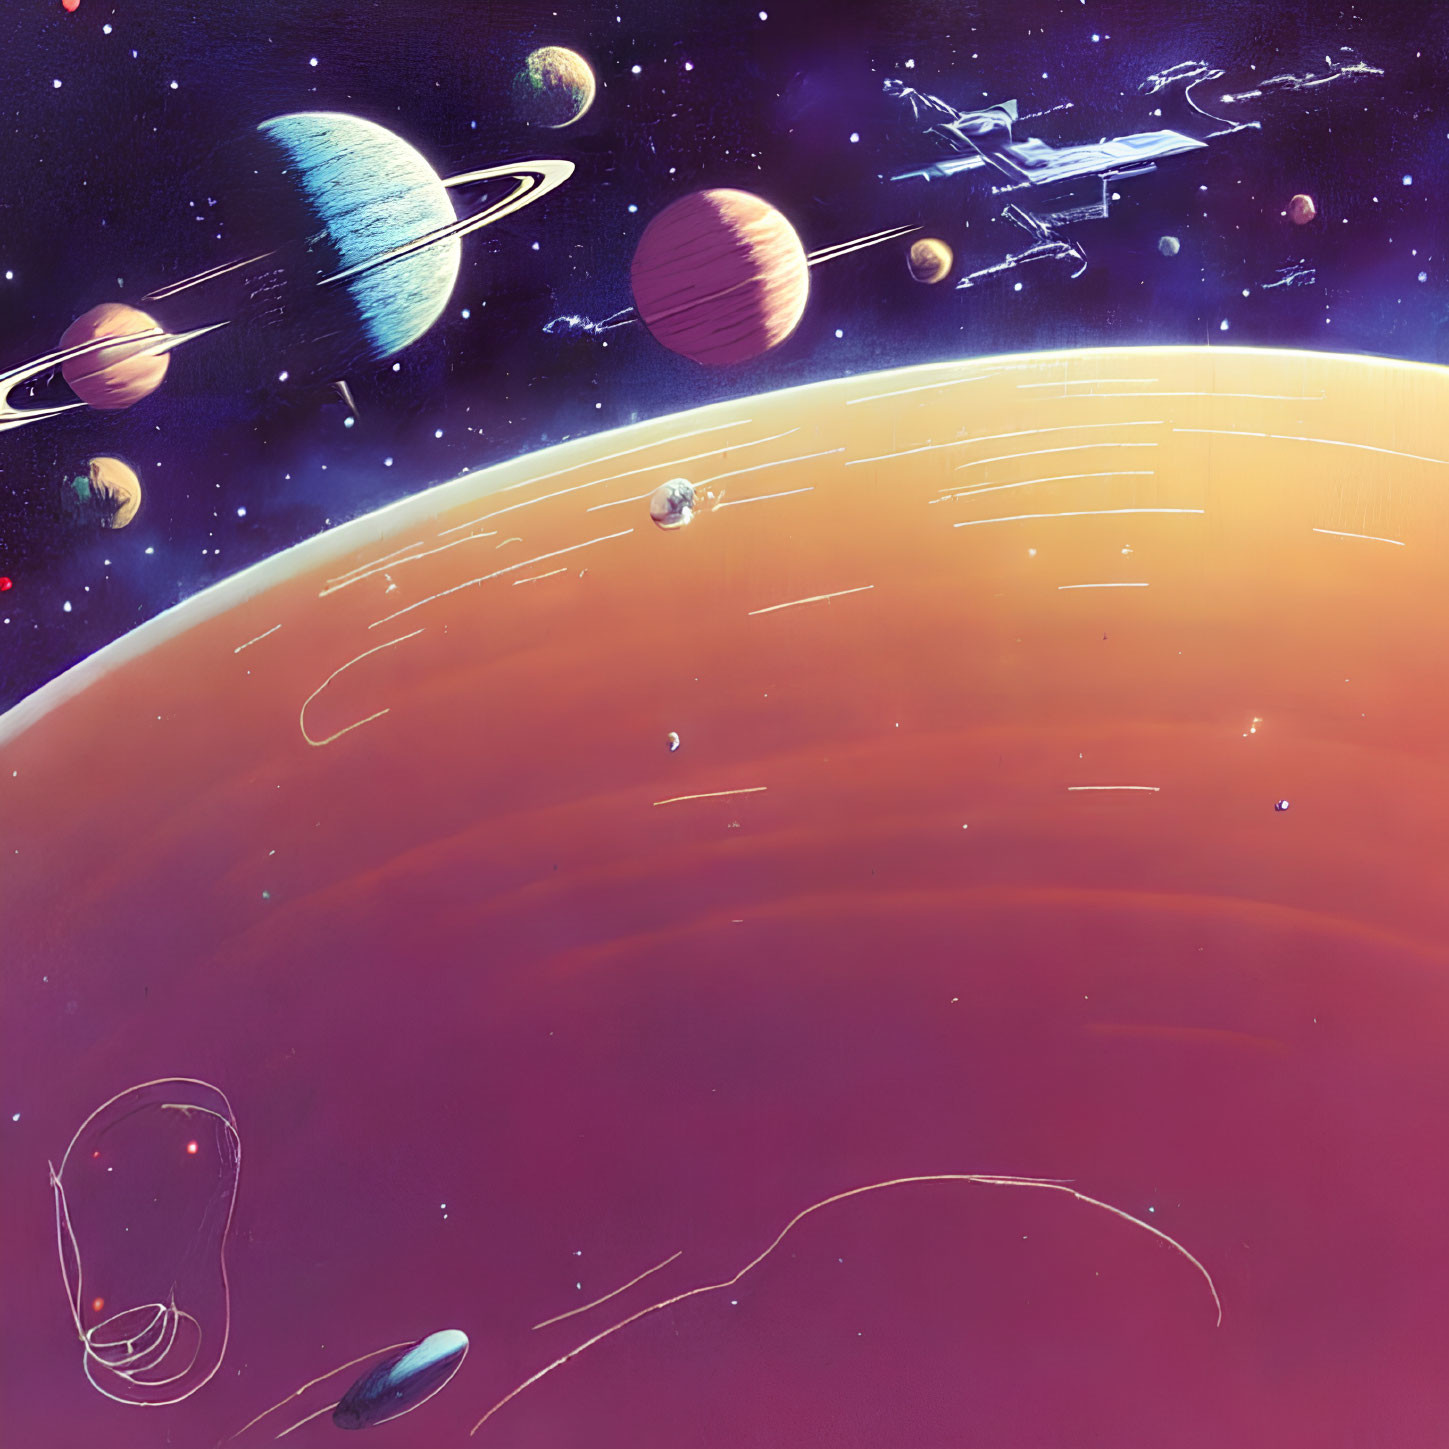 Colorful space illustration with orange planet, rings, other planets, and spaceship among stars